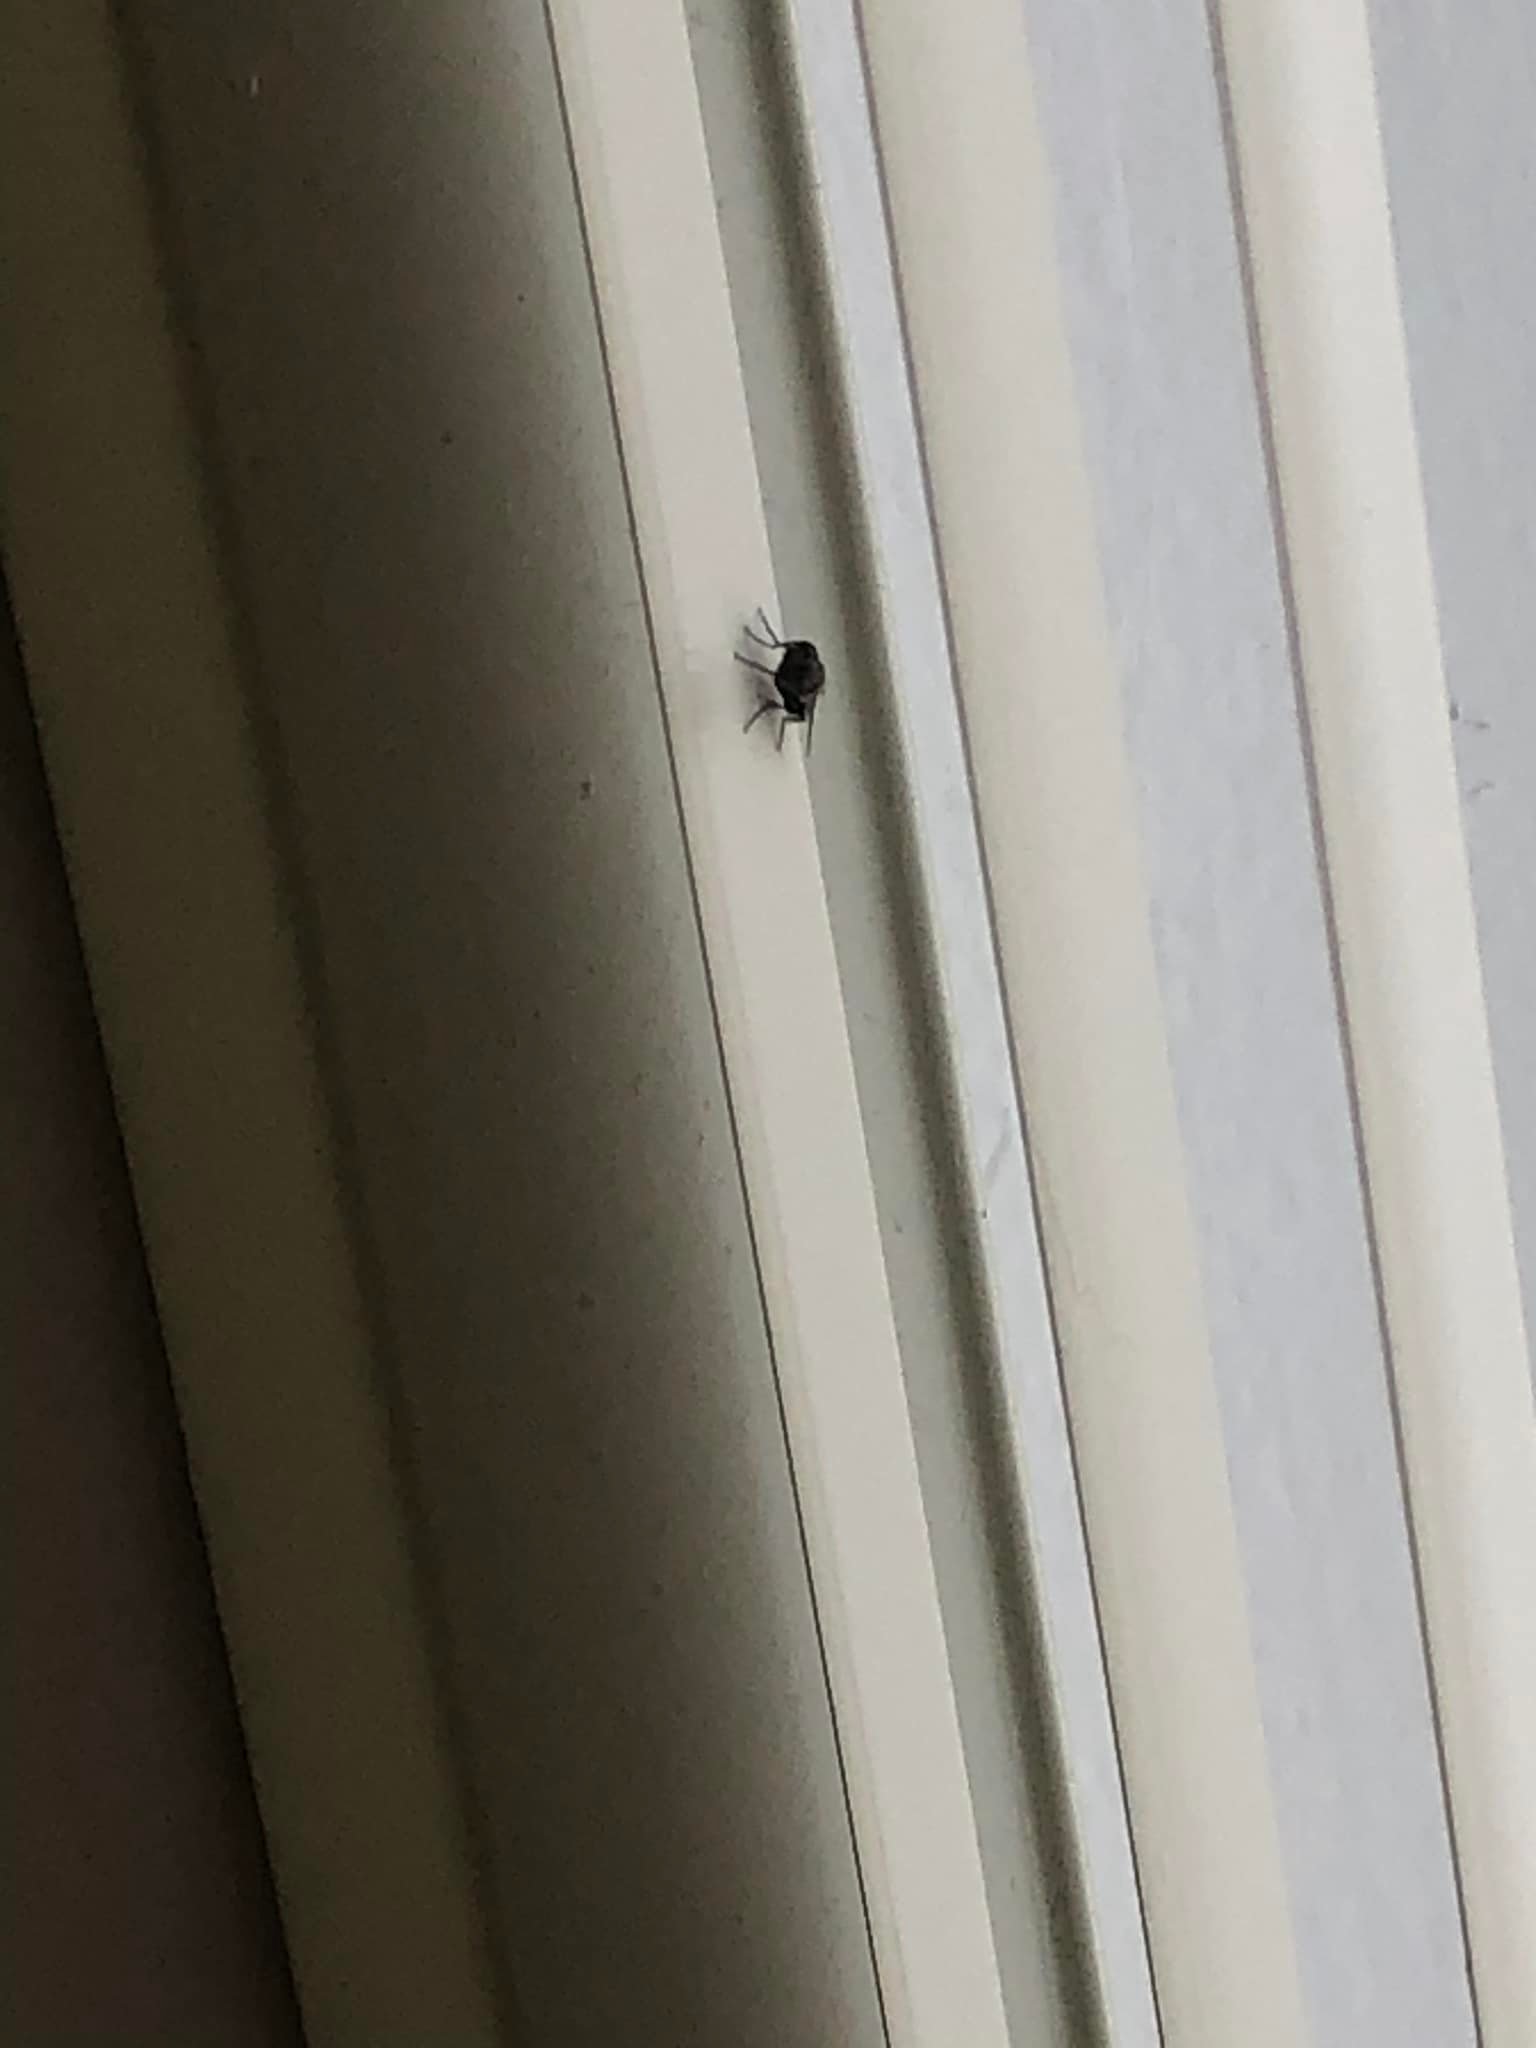 Housefly sitting on the edge of a window frame, looking inside.